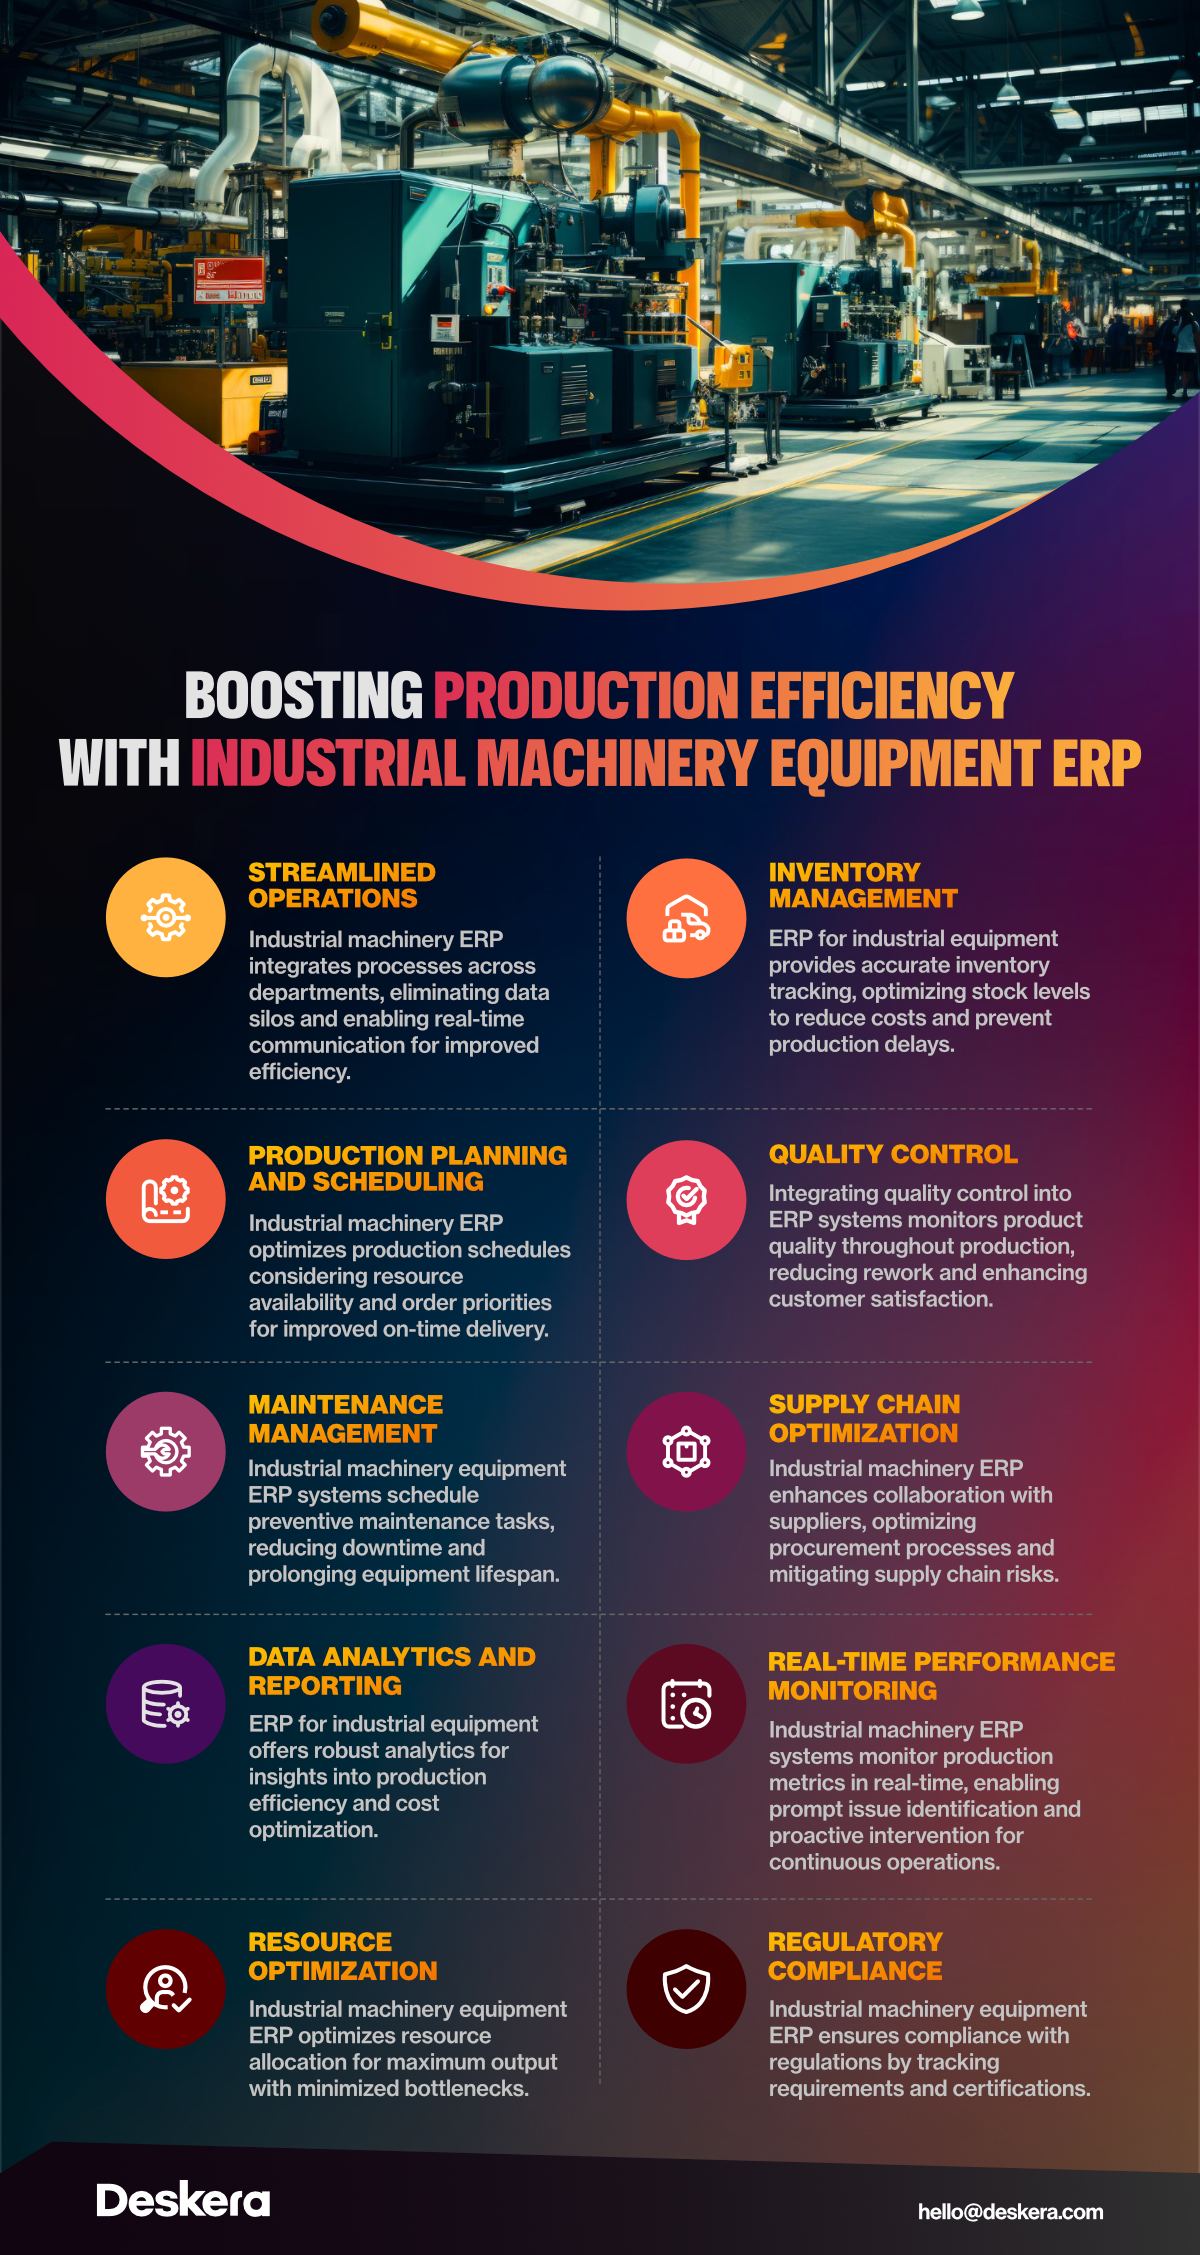 Boosting Production Efficiency with Industrial Machinery Equipment ERP